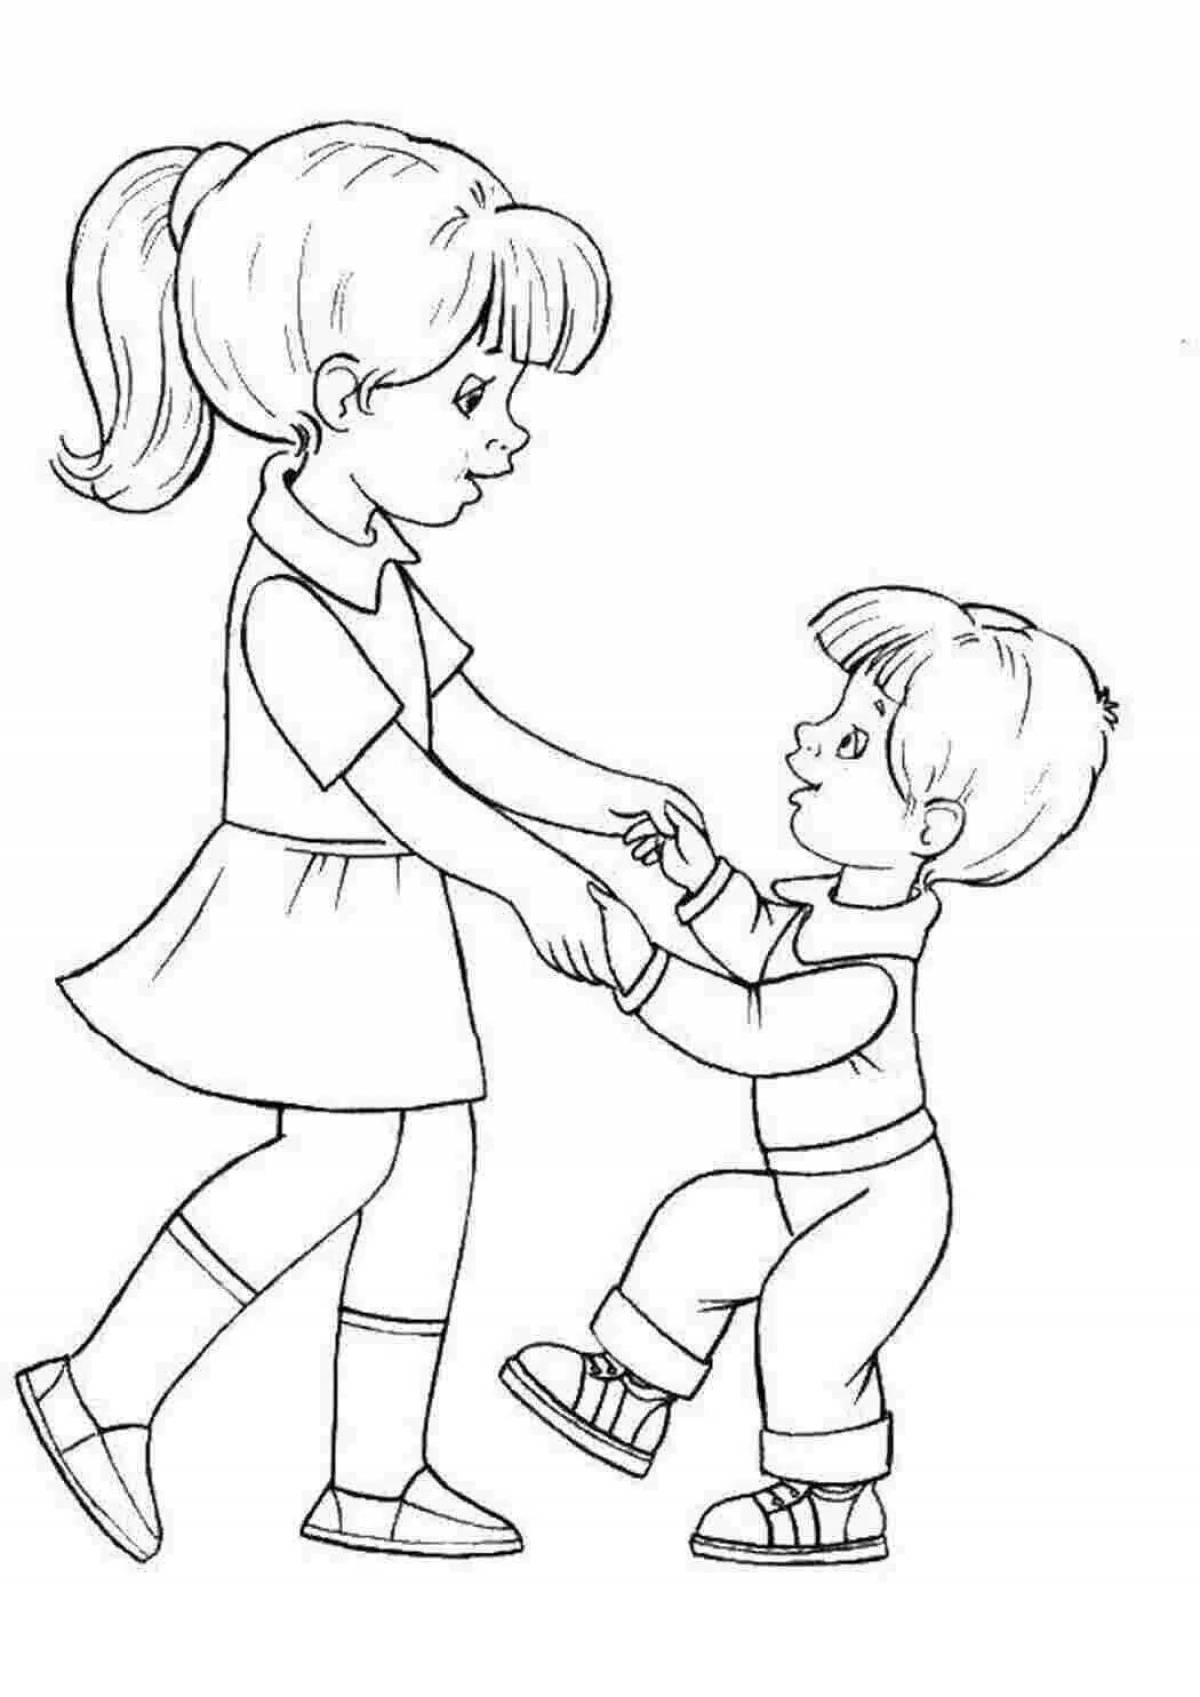 Great coloring drawing of a girl and a boy